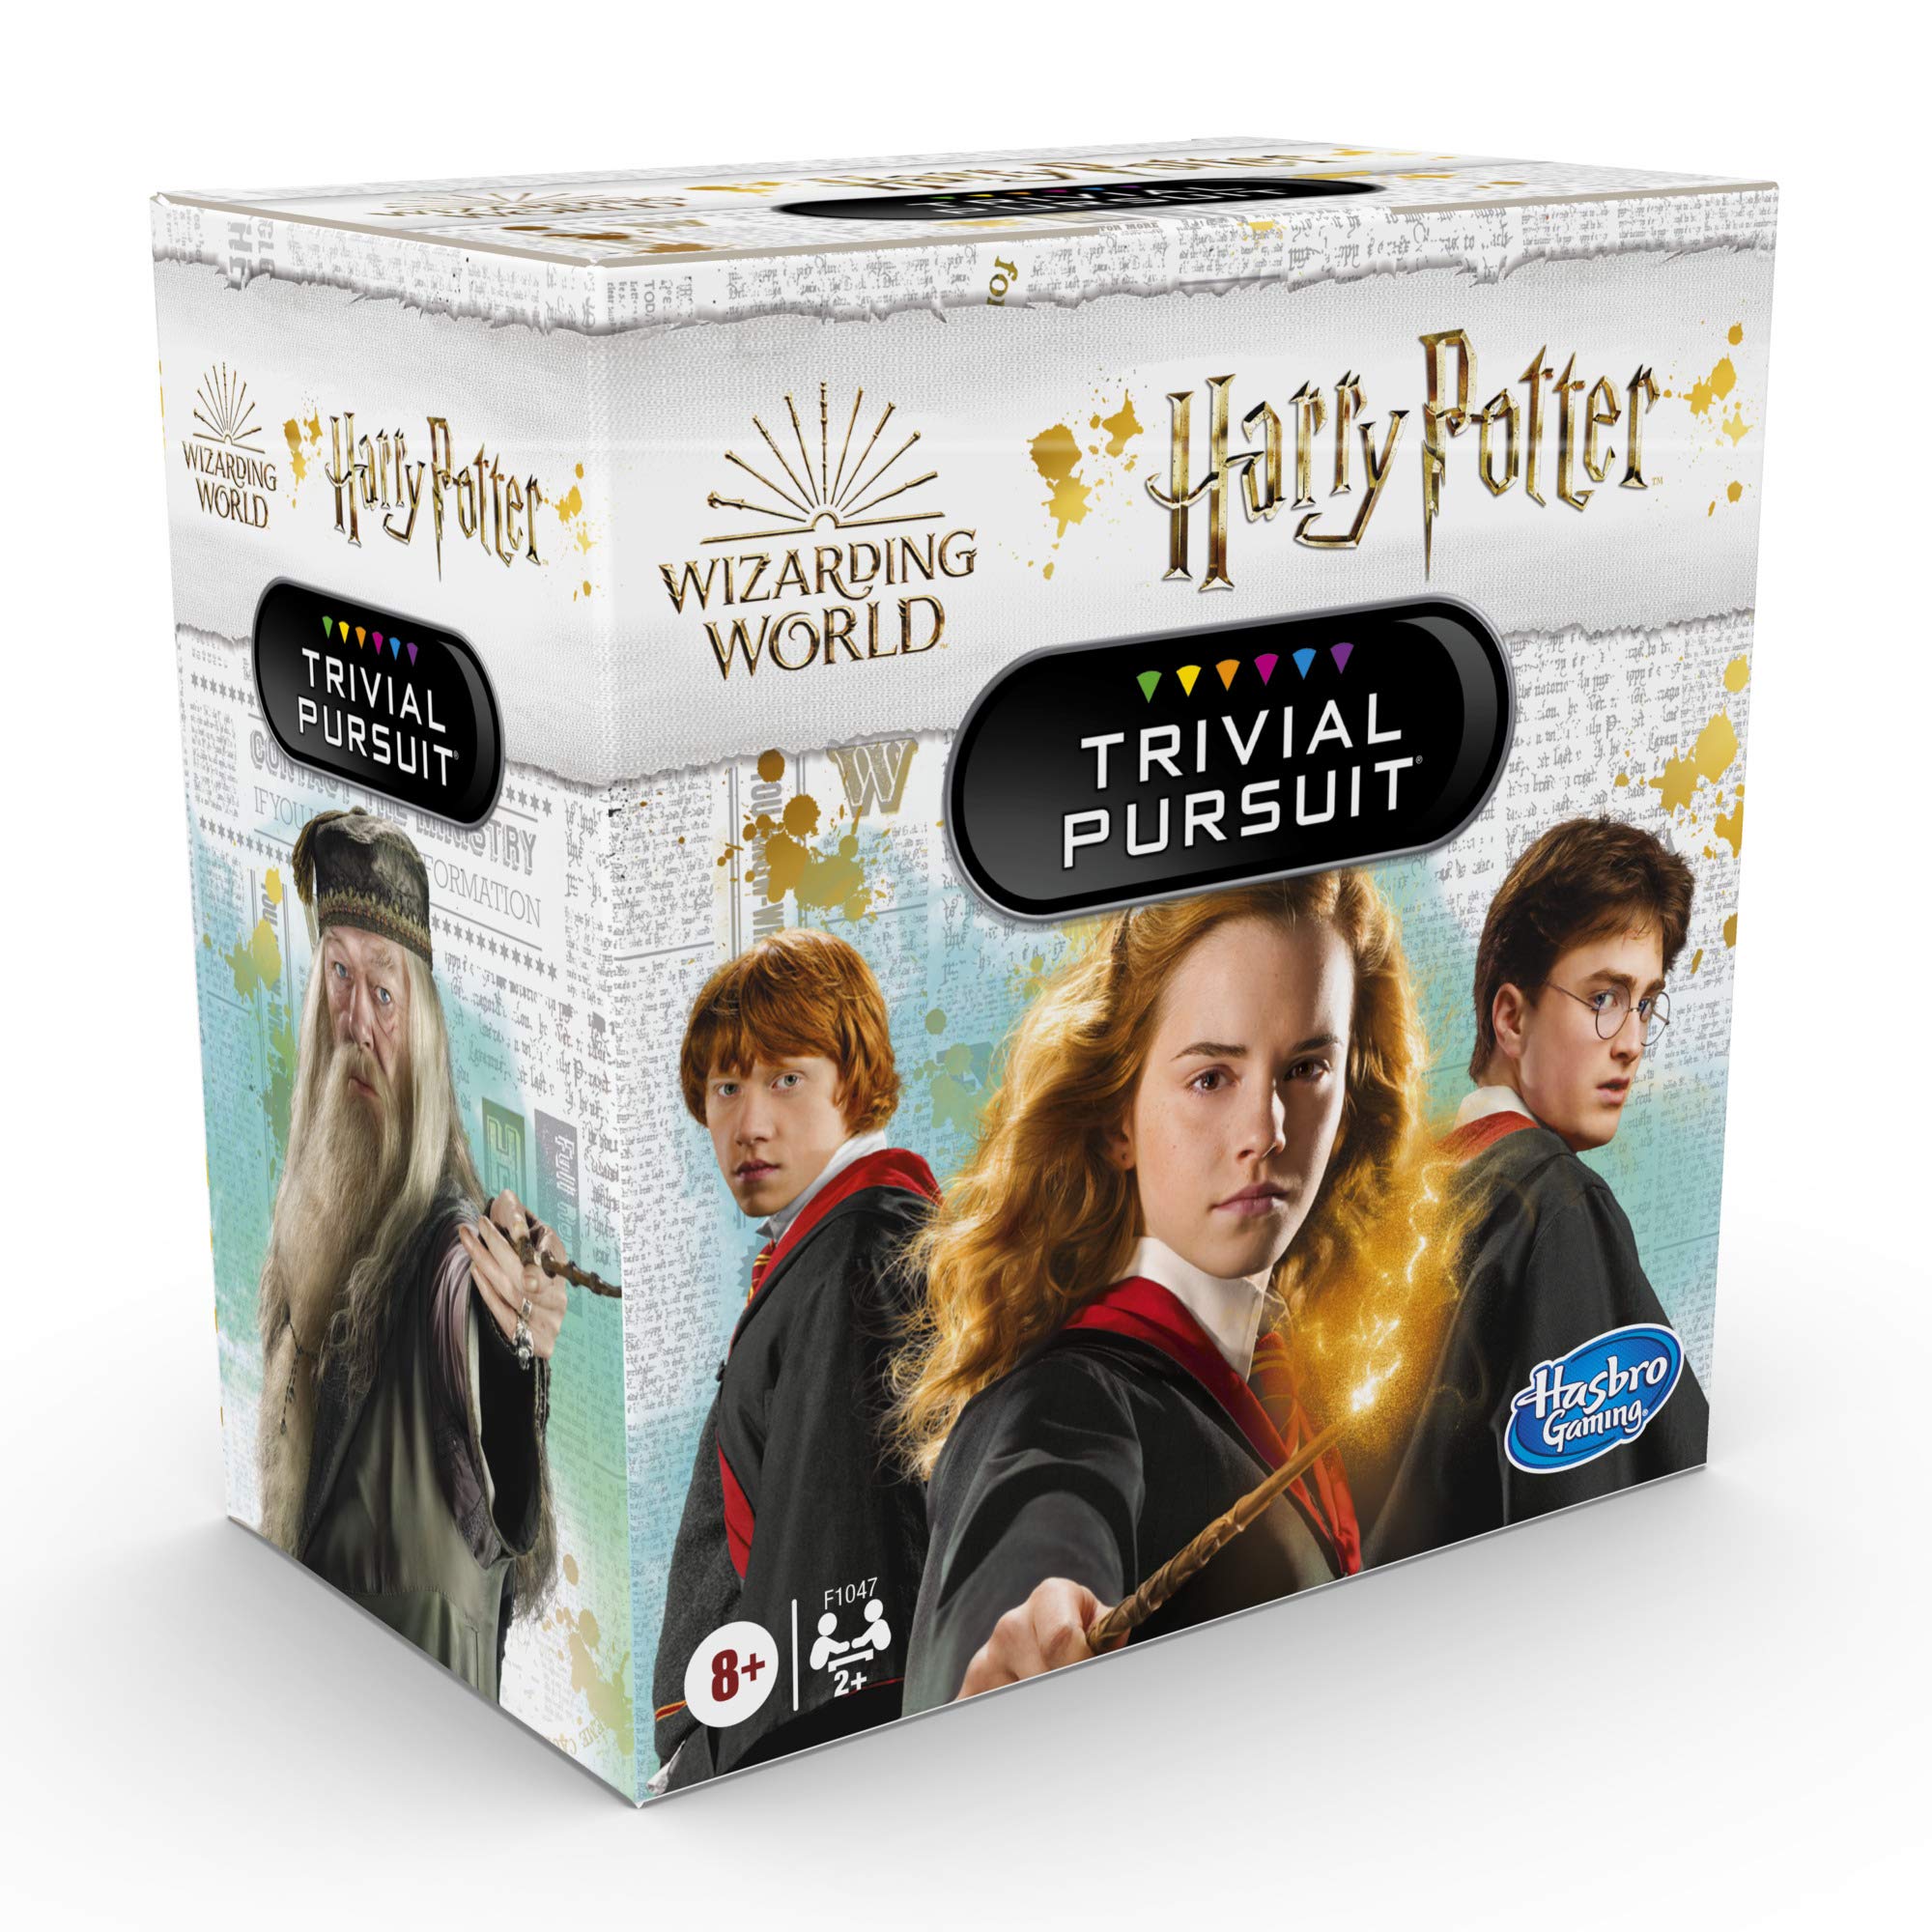 Hasbro Gaming Trivial Pursuit: Wizarding World Harry Potter Edition Compact Trivia Game for 2 or More Players, 600 Trivia Questions, Ages 8 and Up (Amazon Exclusive)